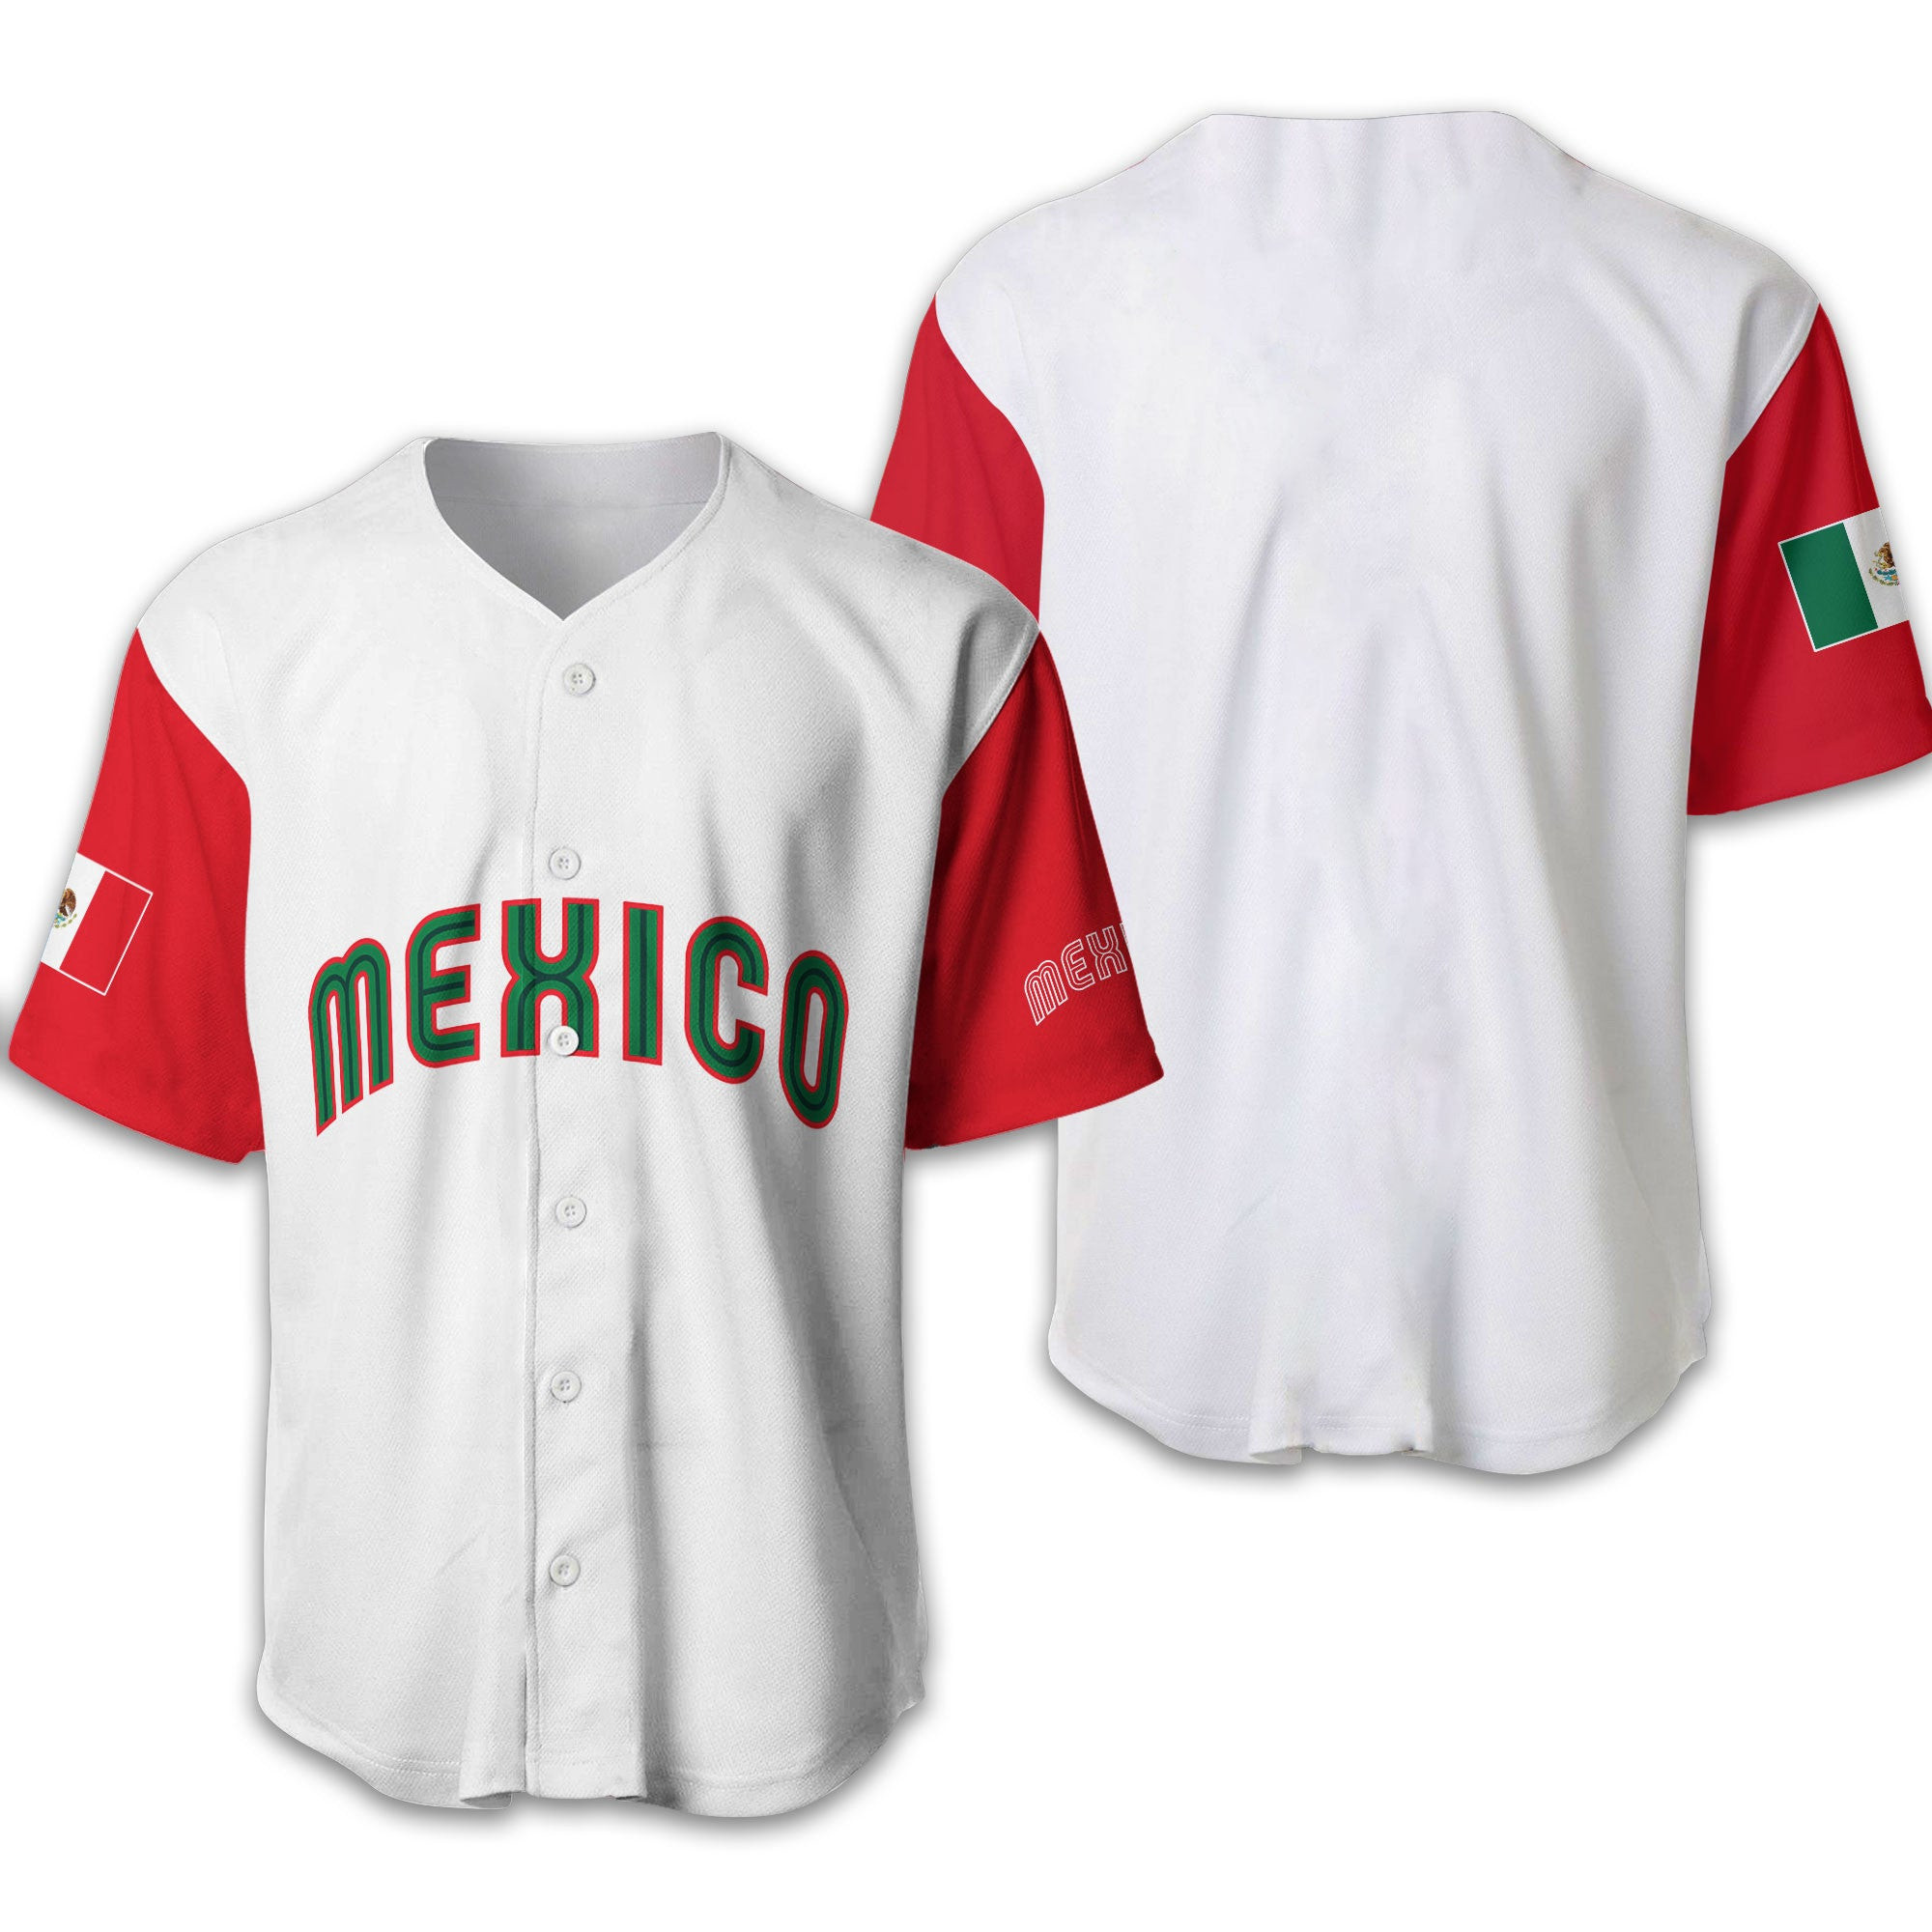 Mexico White And Red Baseball Jersey